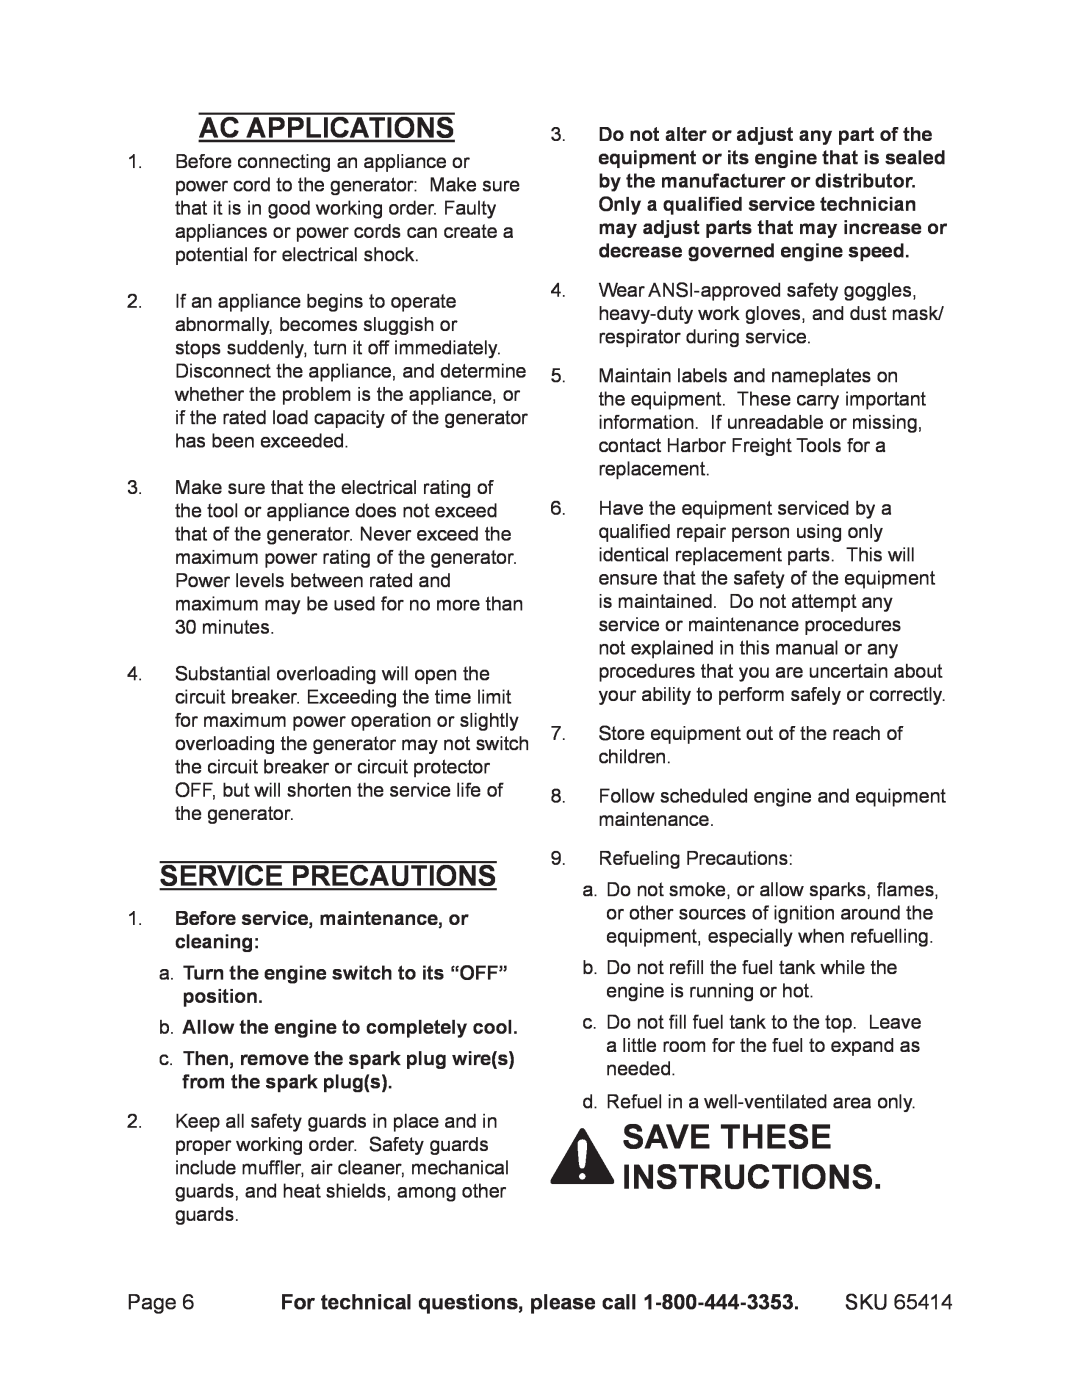 Chicago Electric 65414 Save these instructions, Ac Applications, Service precautions, For technical questions, please call 